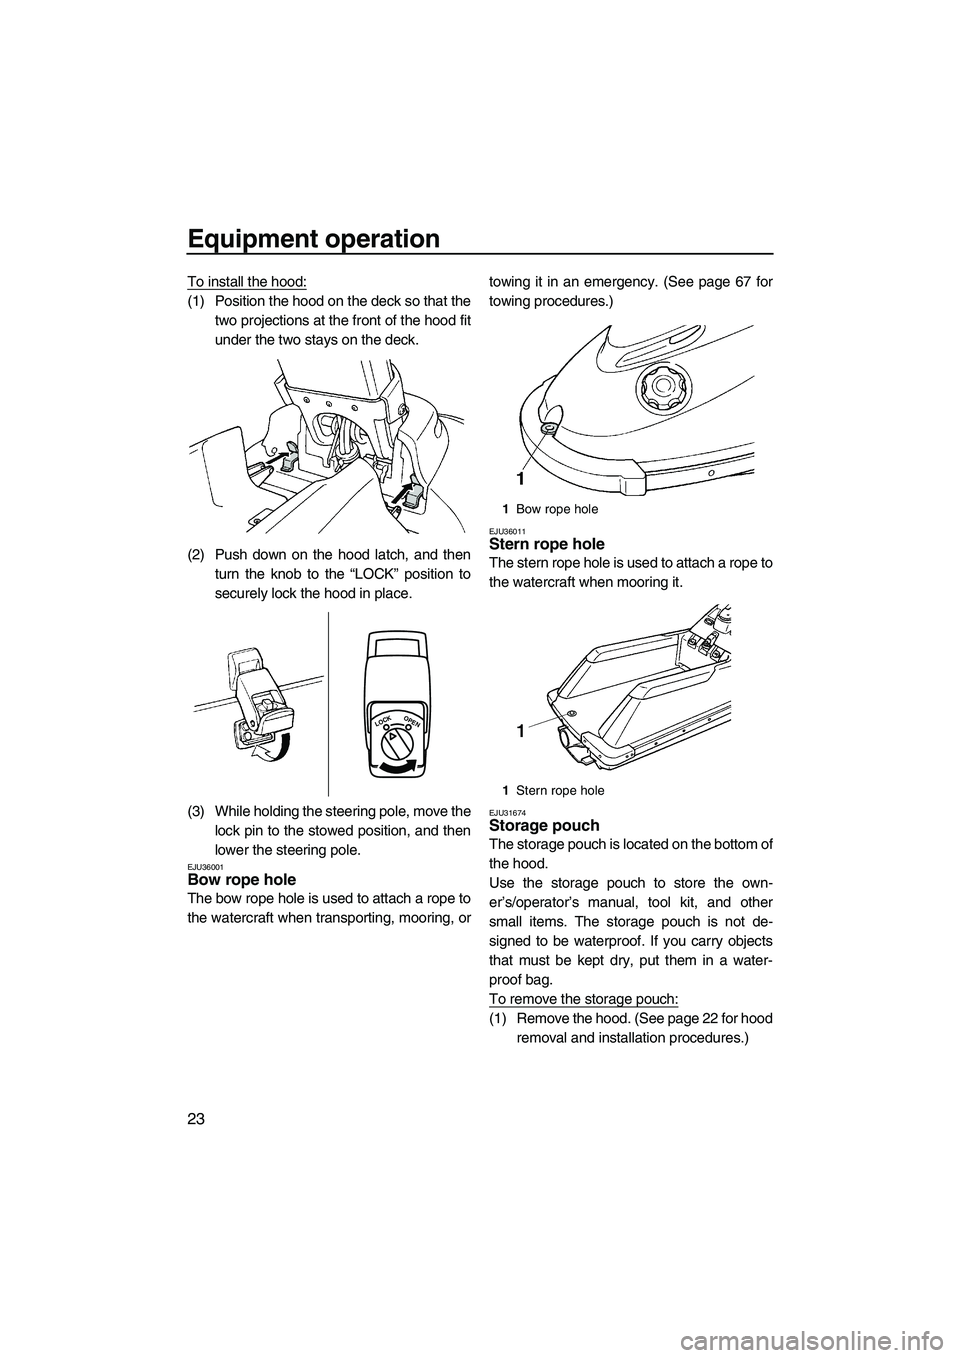 YAMAHA SUPERJET 2010  Owners Manual Equipment operation
23
To install the hood:
(1) Position the hood on the deck so that the
two projections at the front of the hood fit
under the two stays on the deck.
(2) Push down on the hood latch,